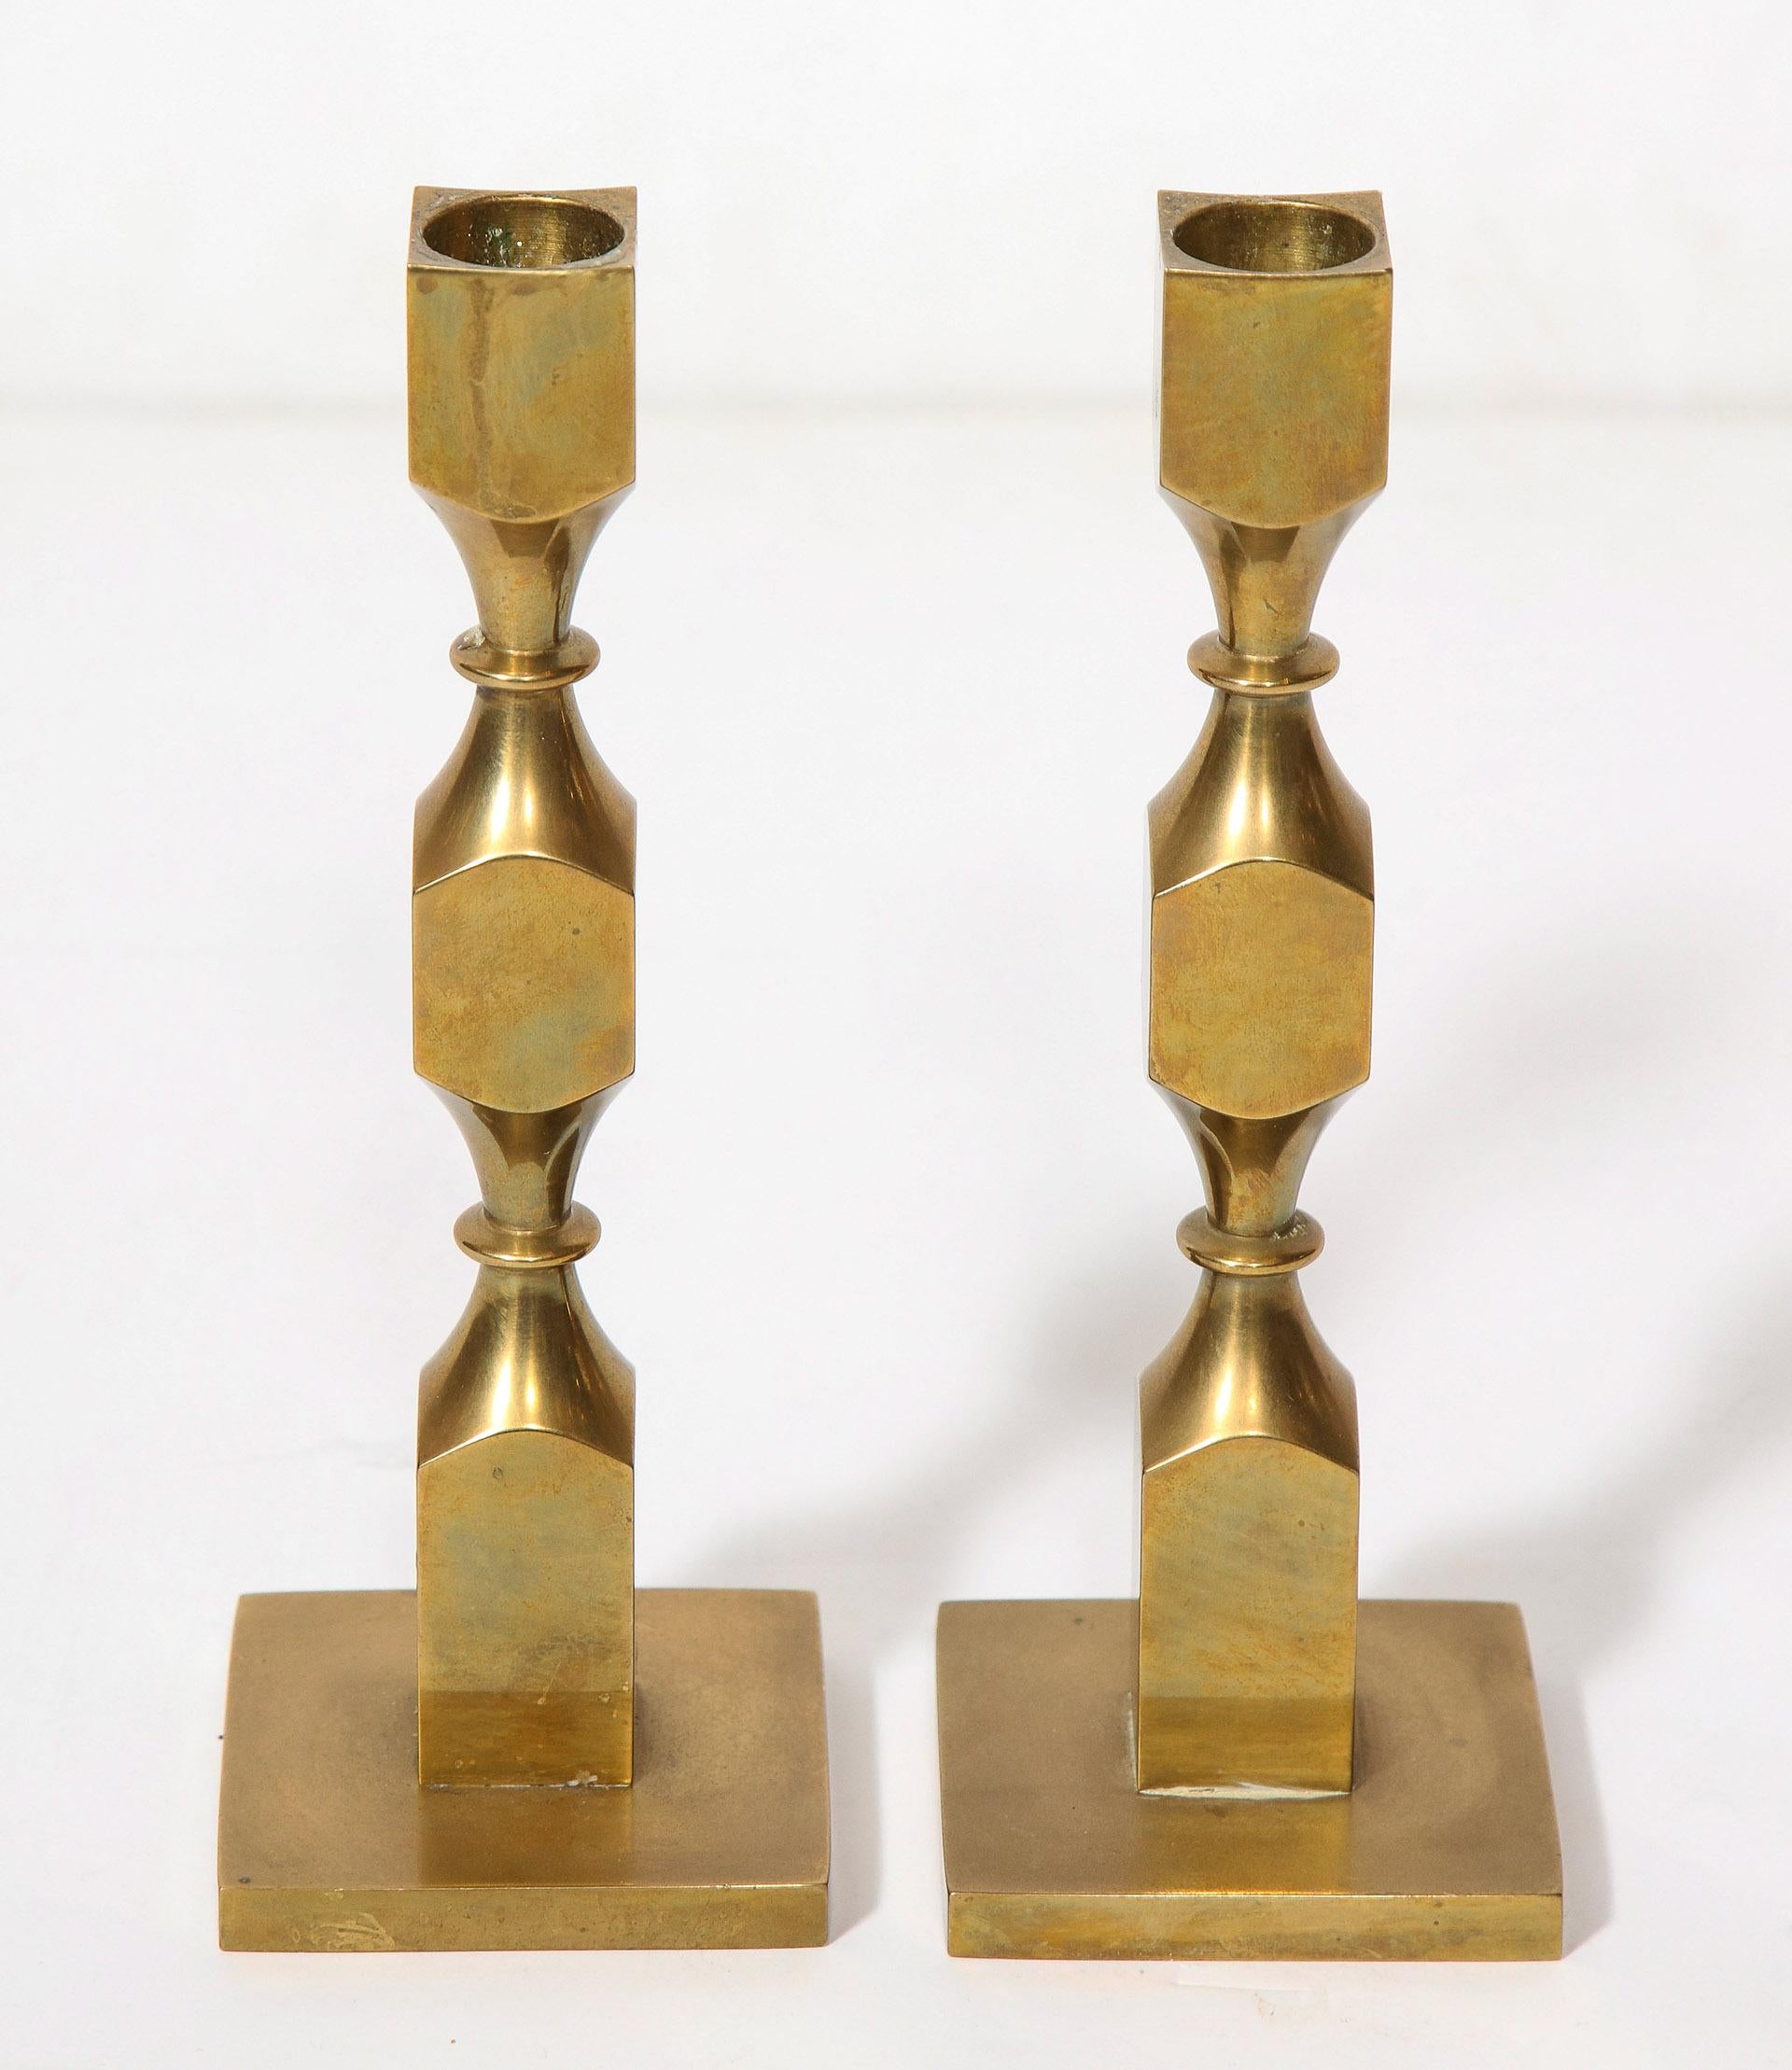 Pair of Swedish brass candlesticks by Lars Bergsten for Gusum

Signed and dated 1983.